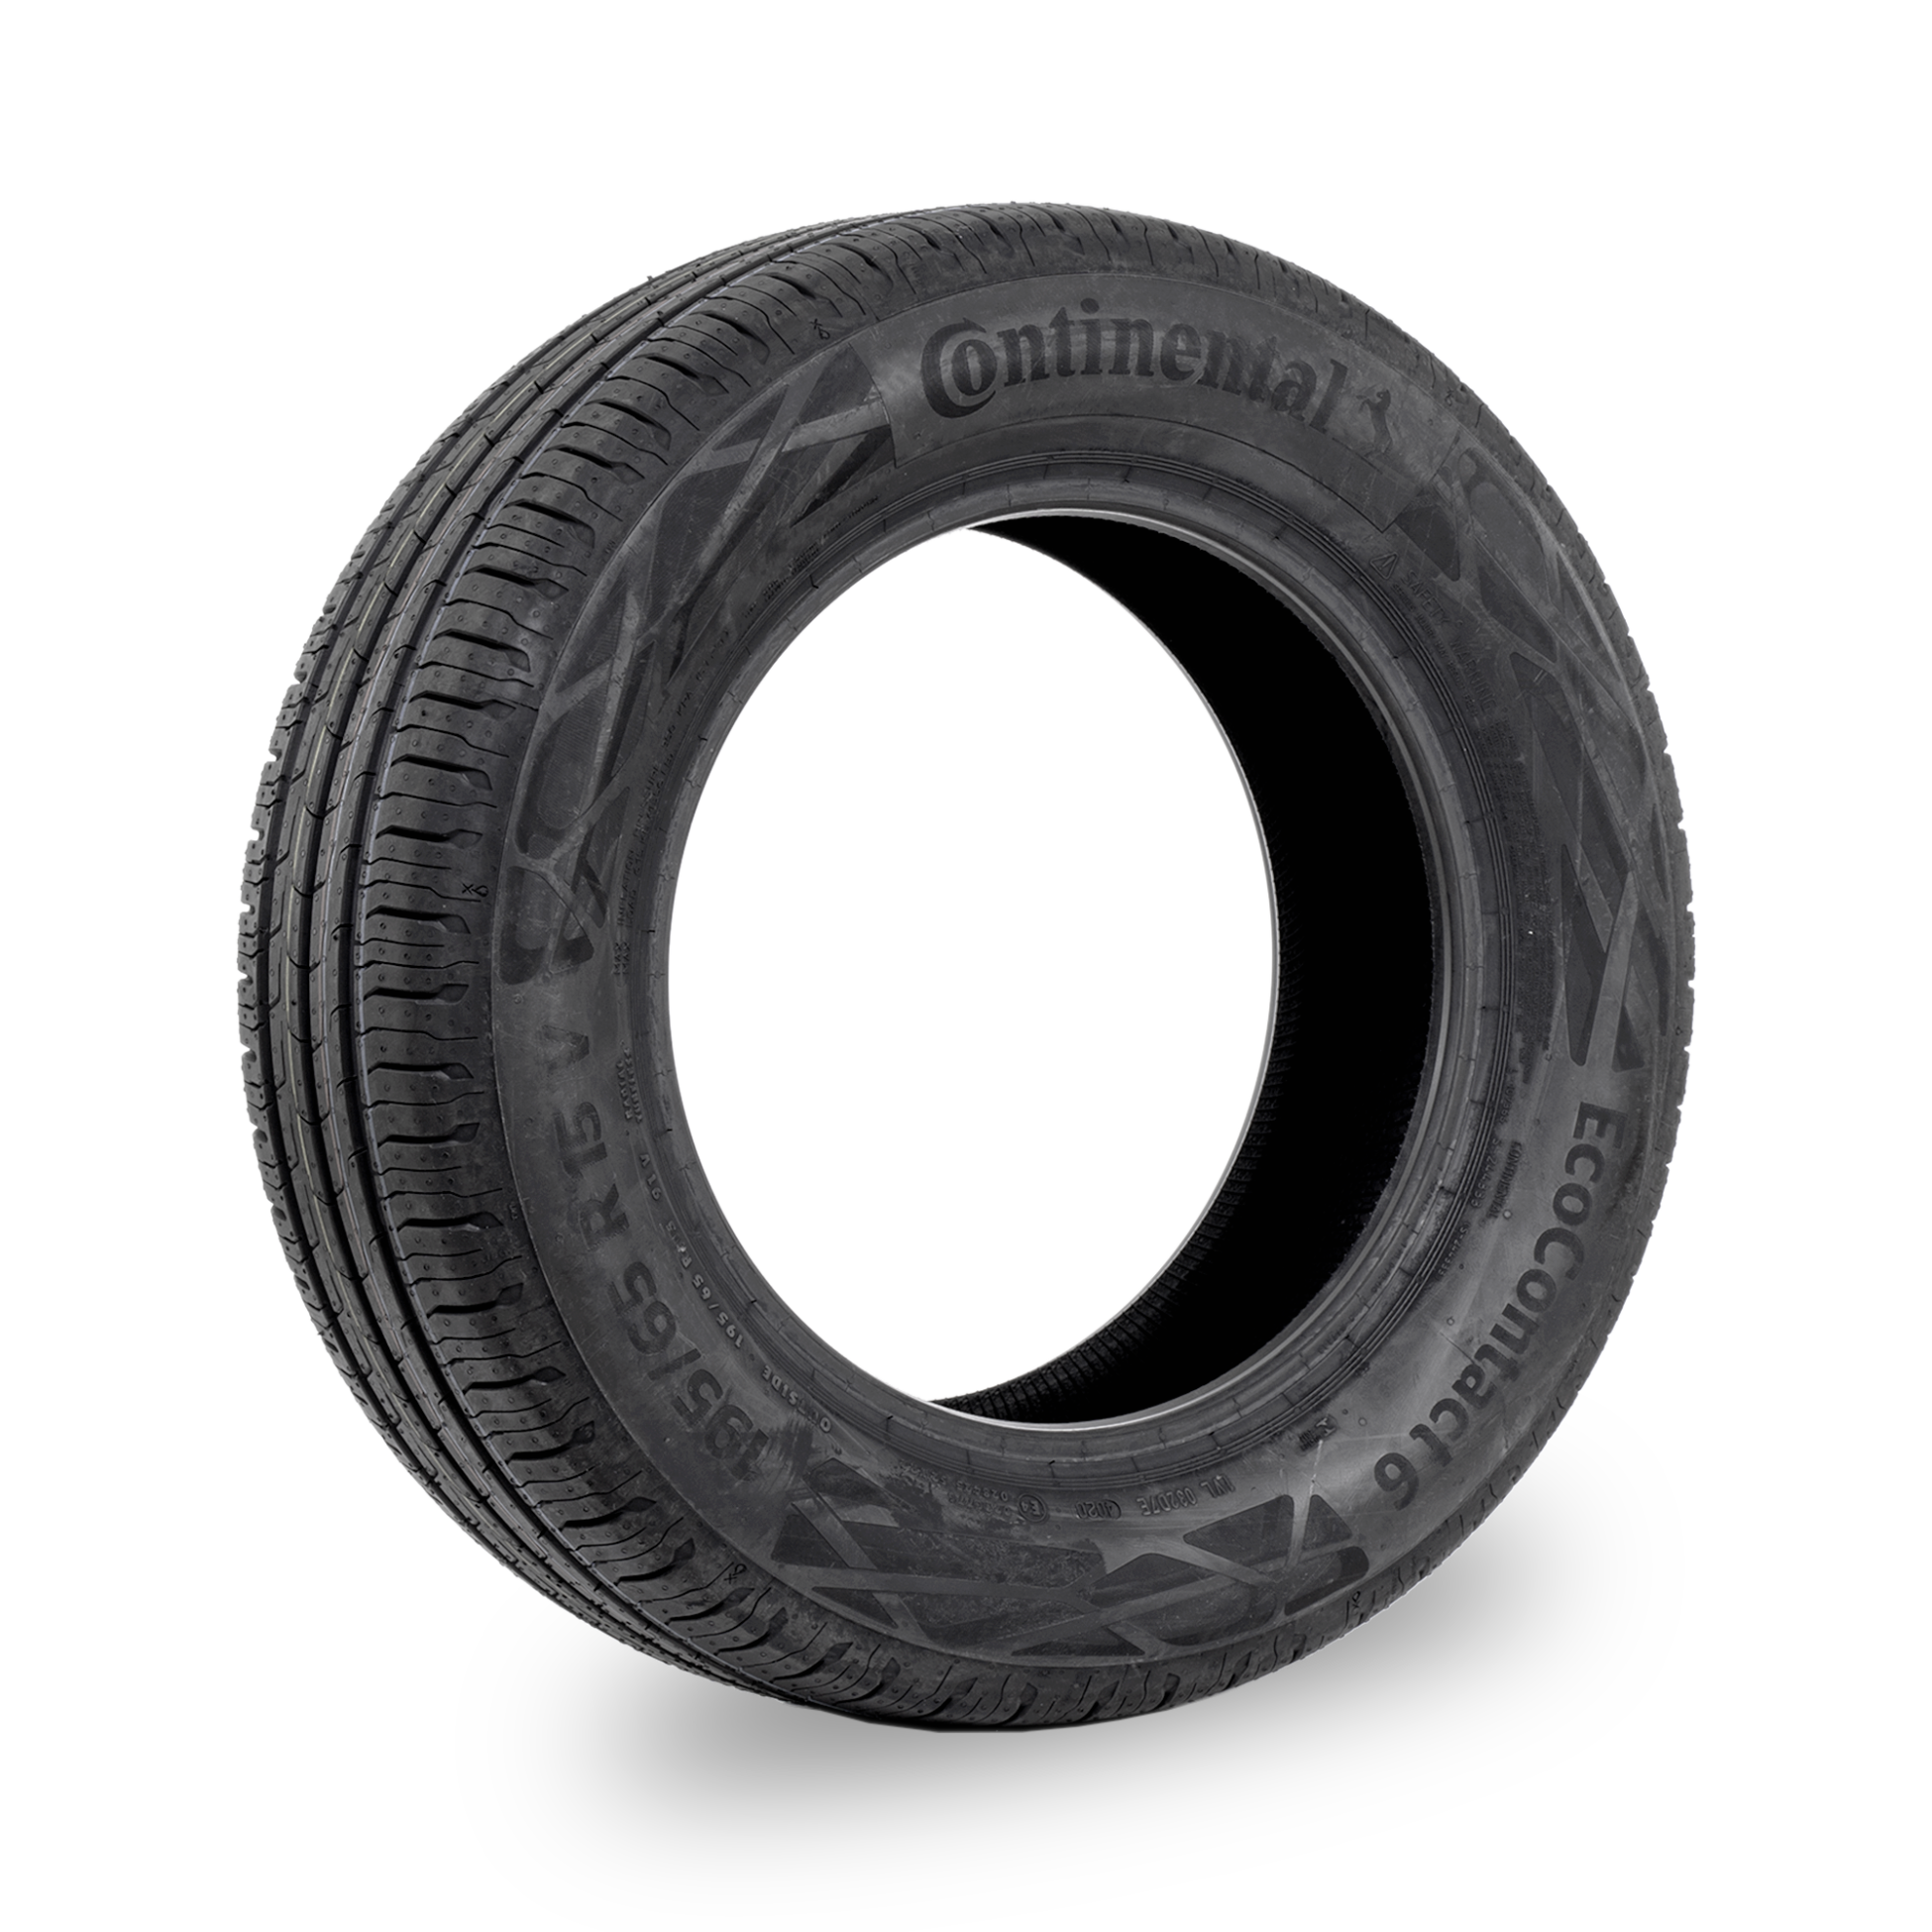 Tyre 4x4 Contact Continental 195/65/15 91V Tyres - 6 Eco